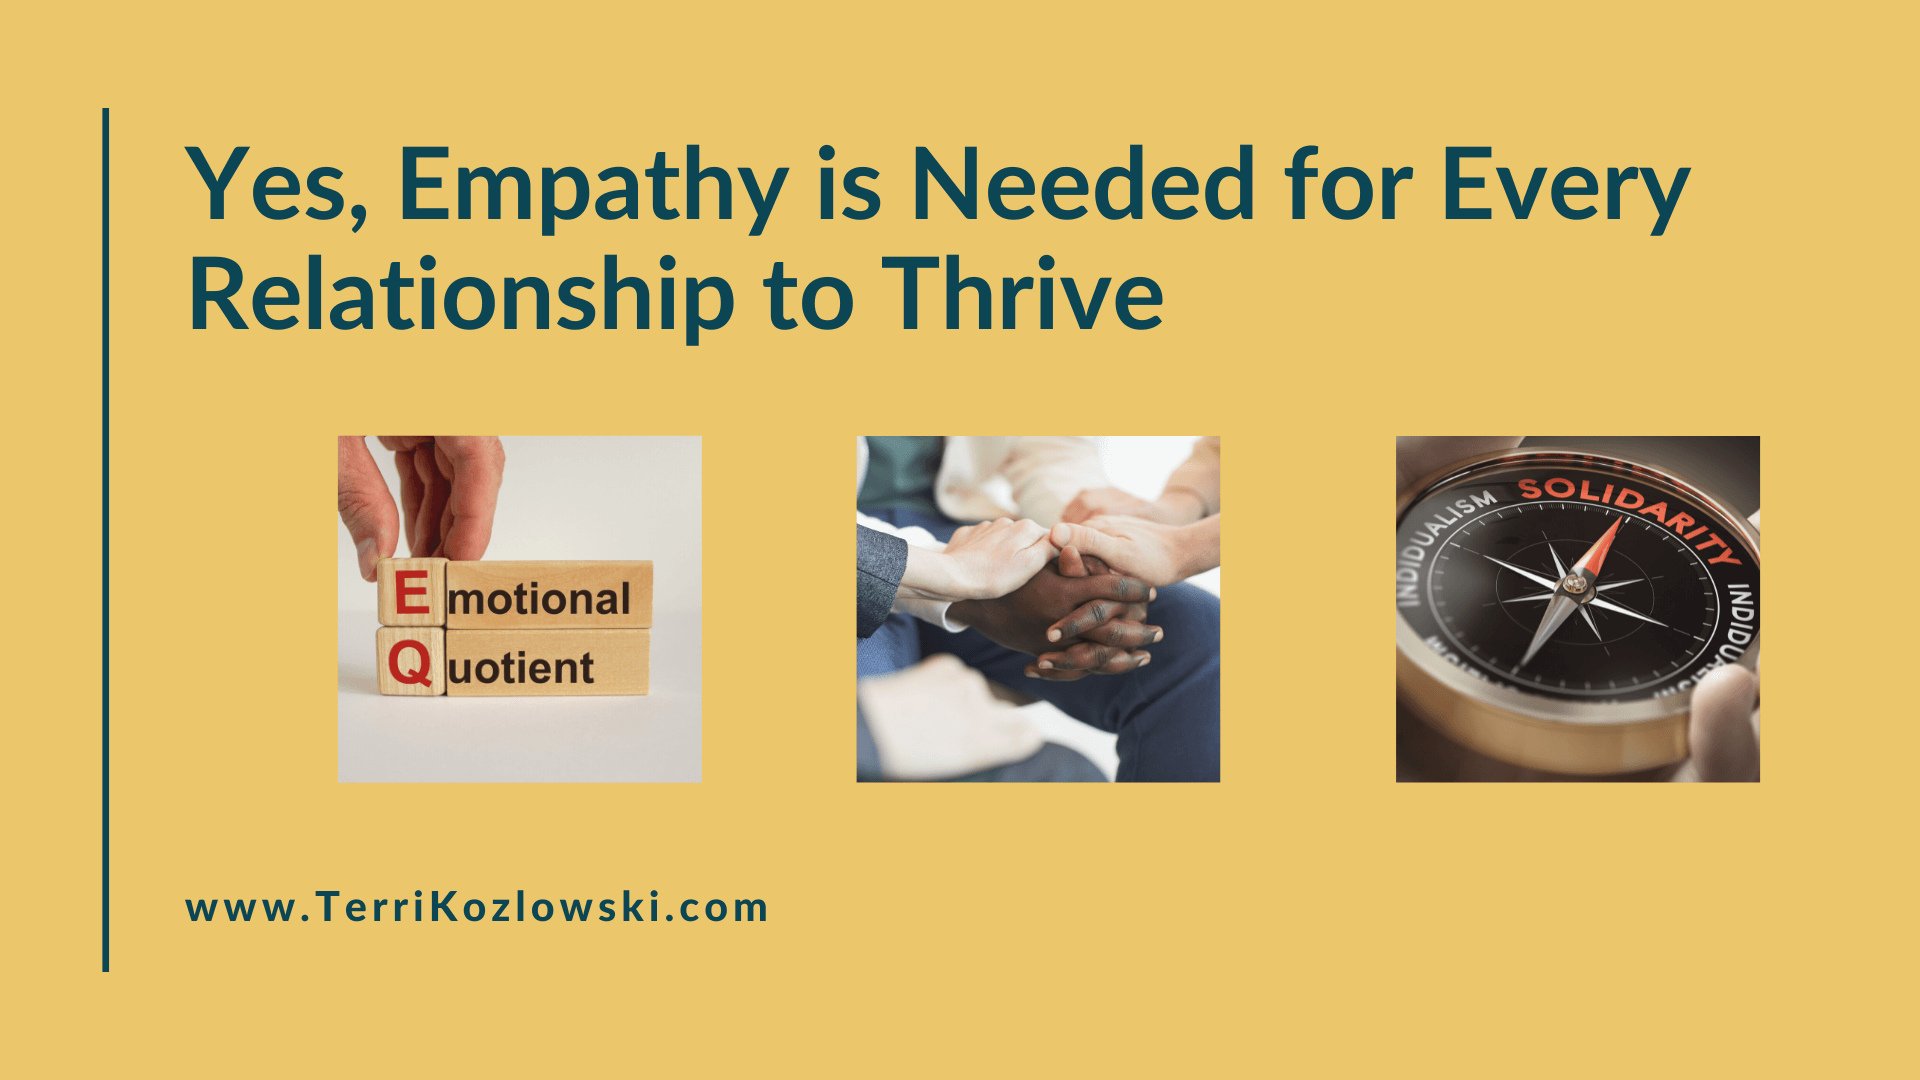 Yes, Empathy is Needed for Every Relationship to Thrive